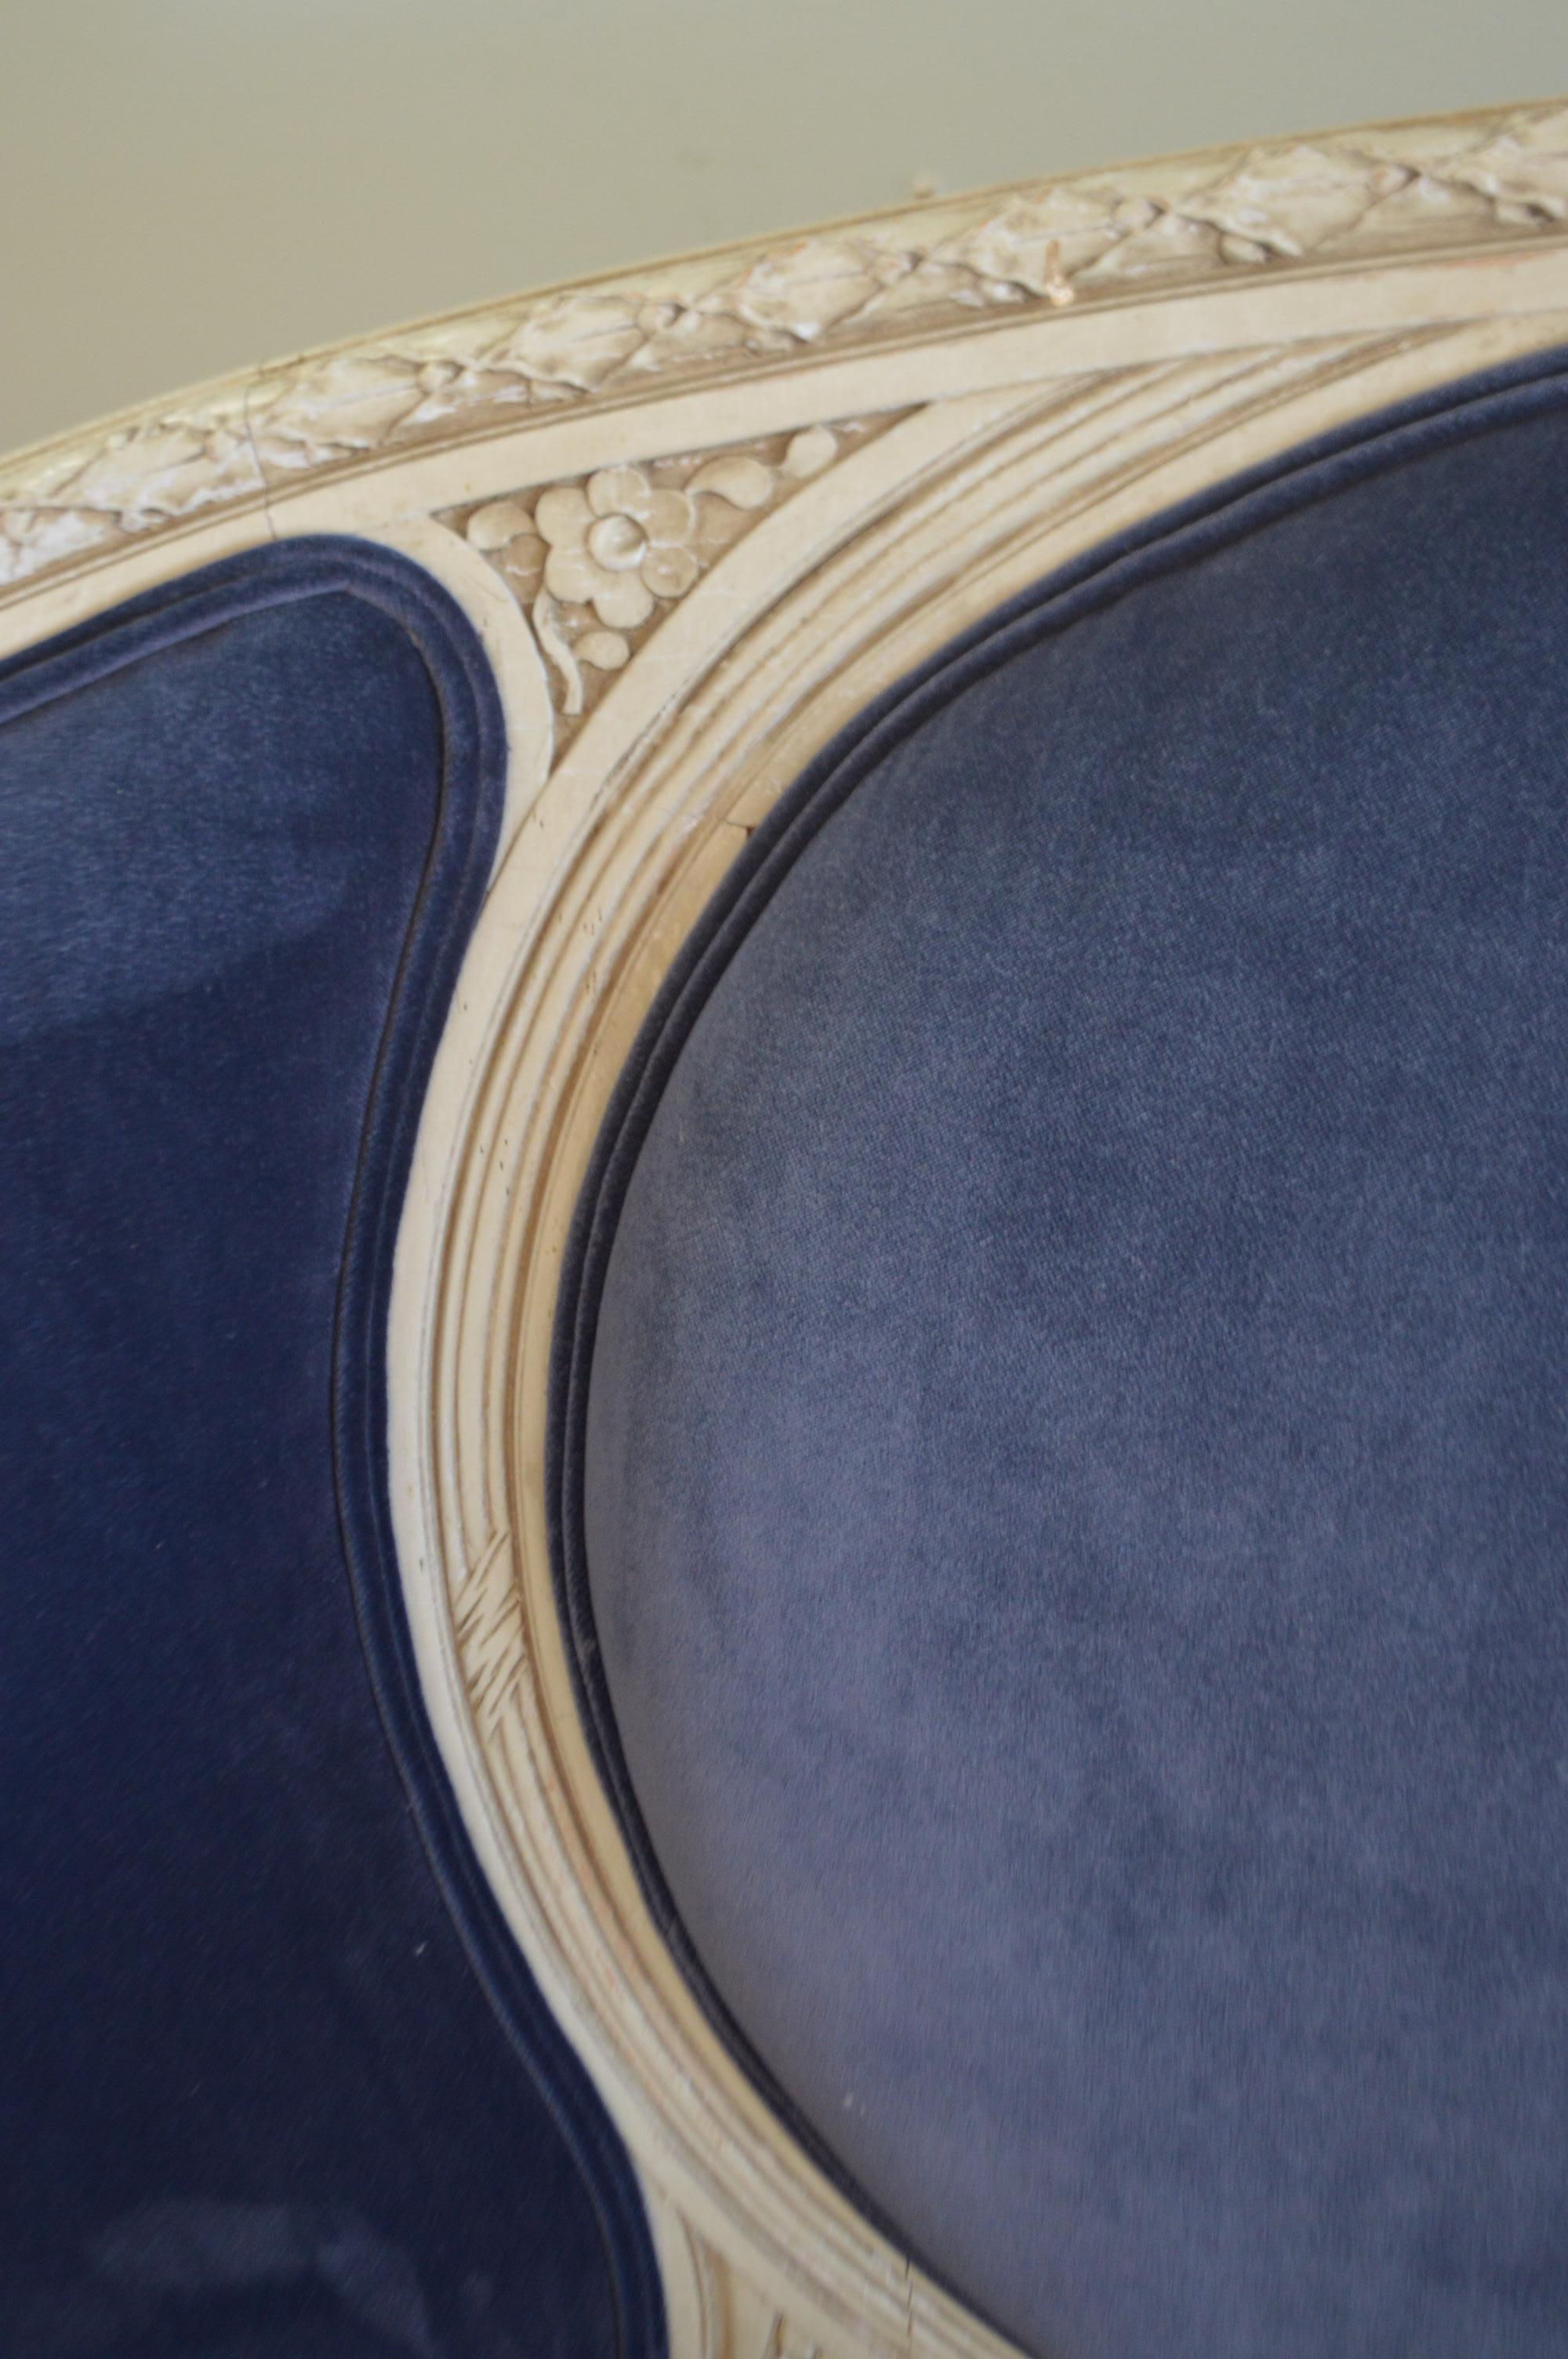 Louis XVI style canape from France, circa 1920 with the original grey painted frame. Elegant with its curved sides, hand-carved details of roses and bow the top.
It has been newly upholstered with a rich blue velvet, the seat cushion is a mixture